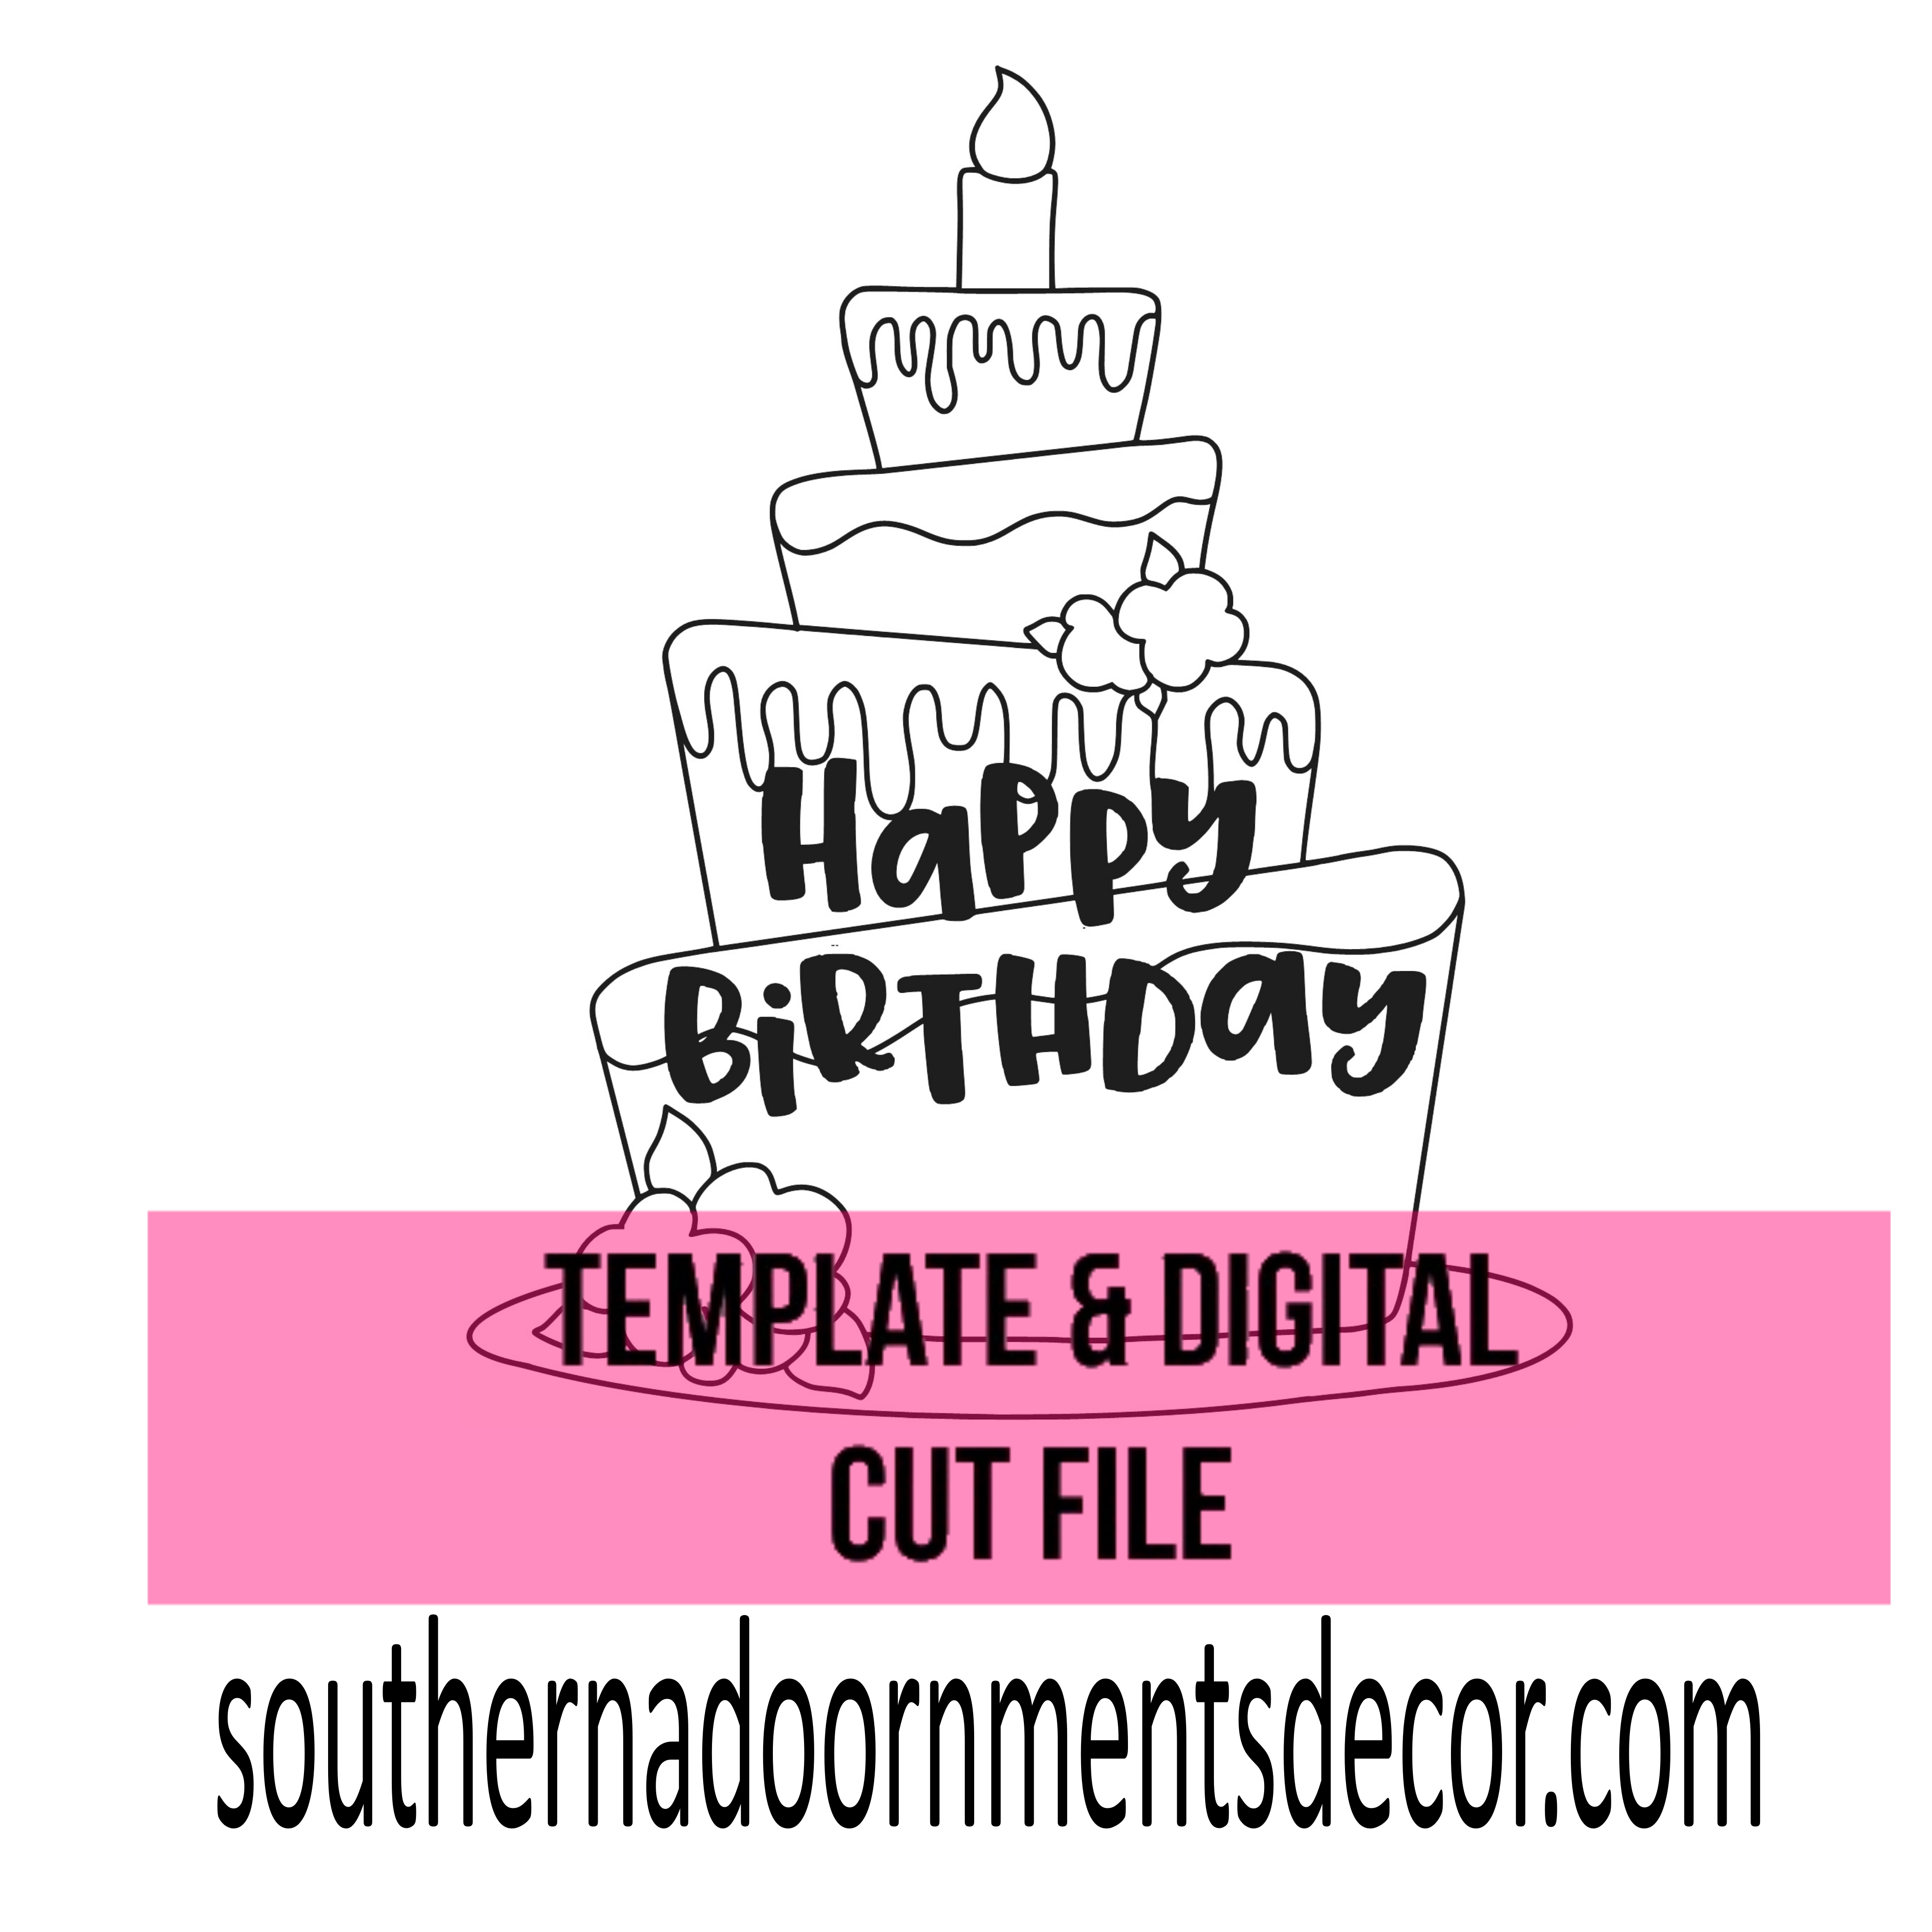 transparent background birthday cake clipart - Clip Art Library